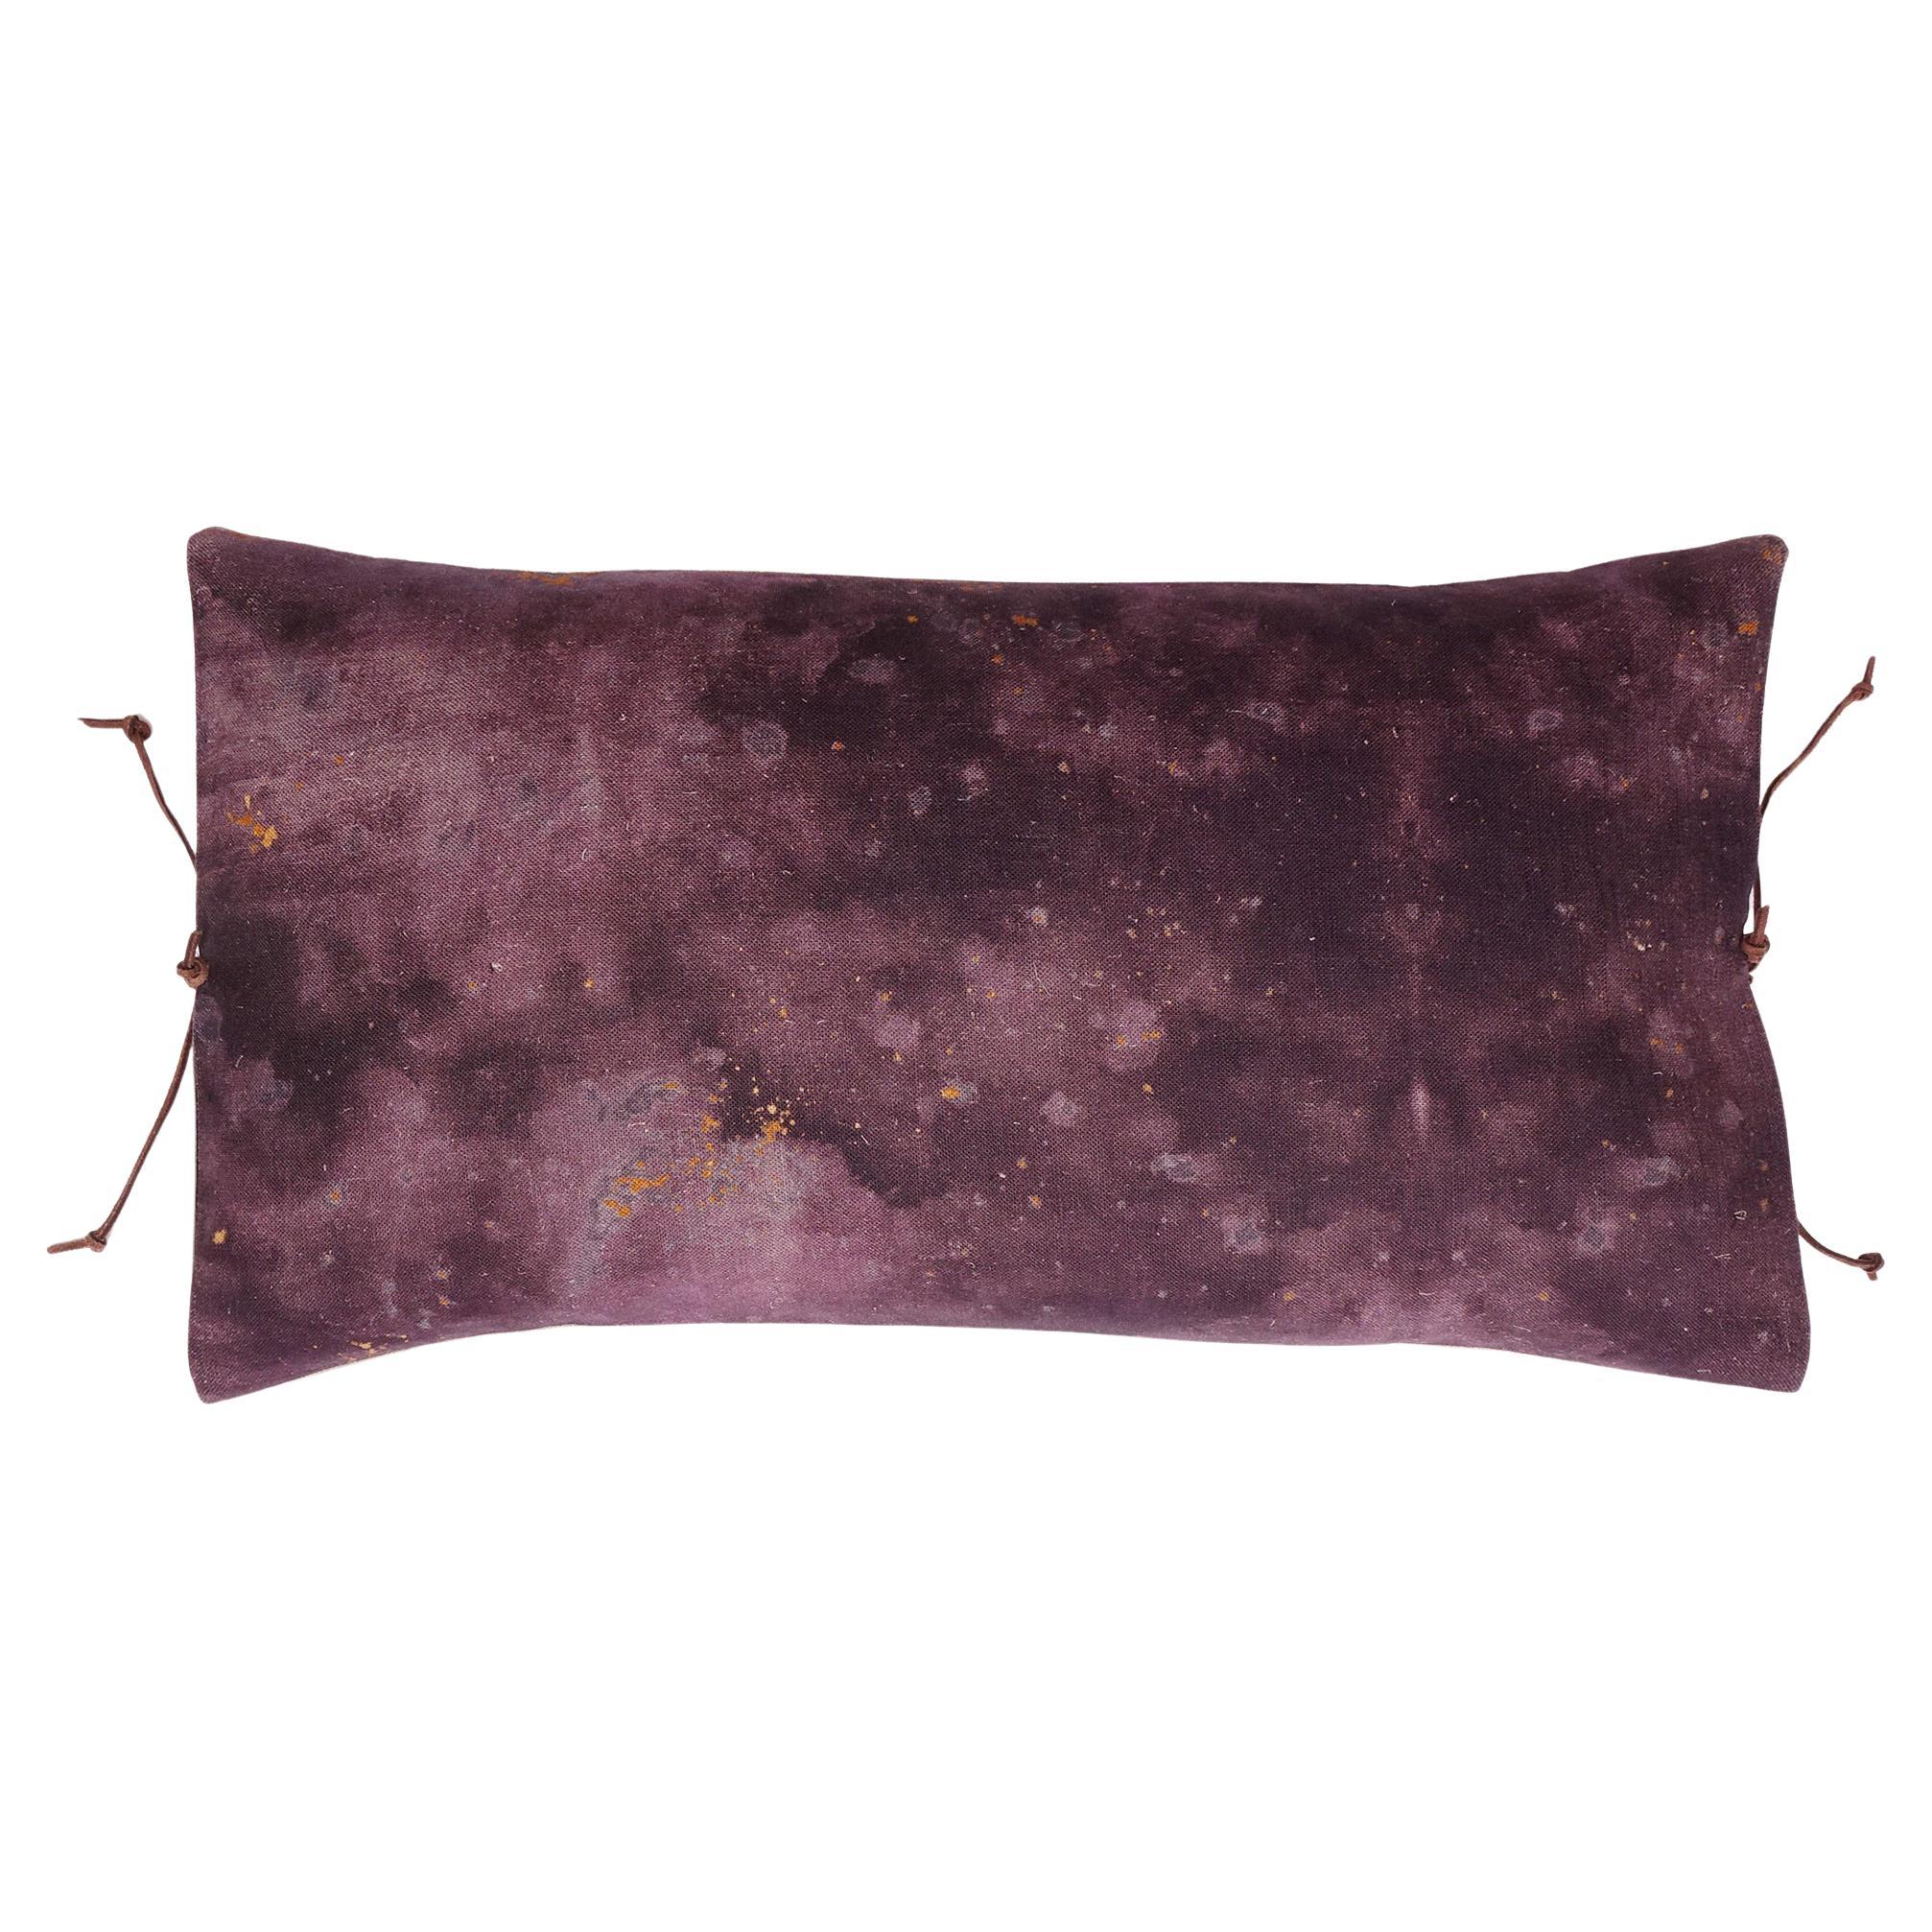 Printed Linen Pillow Cloudy Dusk For Sale